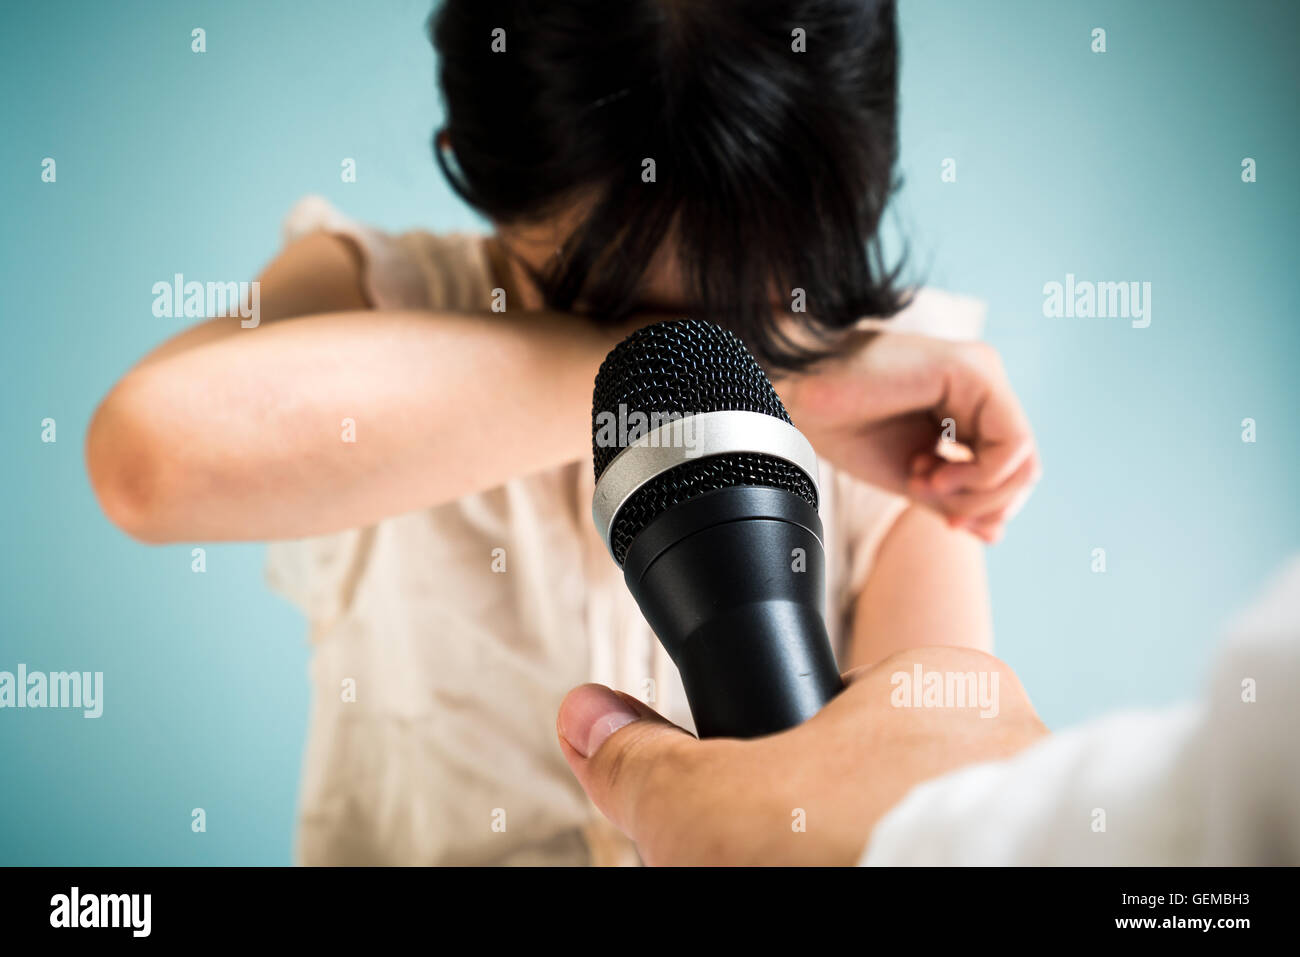 Woman crying at a press conference Stock Photo